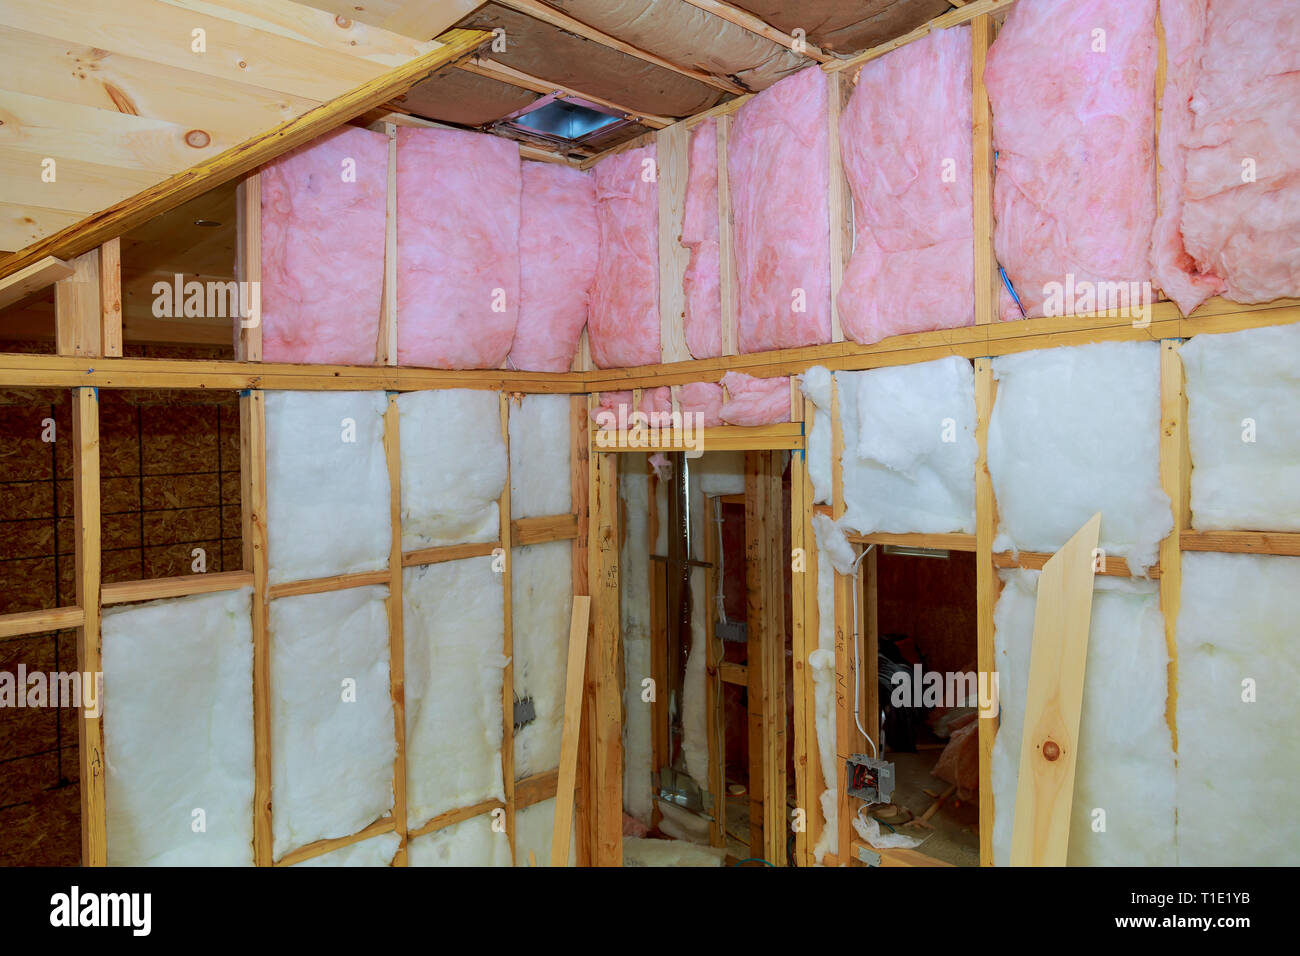 Wooden frame for future walls insulated with rock wool and fiberglass insulation home, construction and renovation concept. Stock Photo